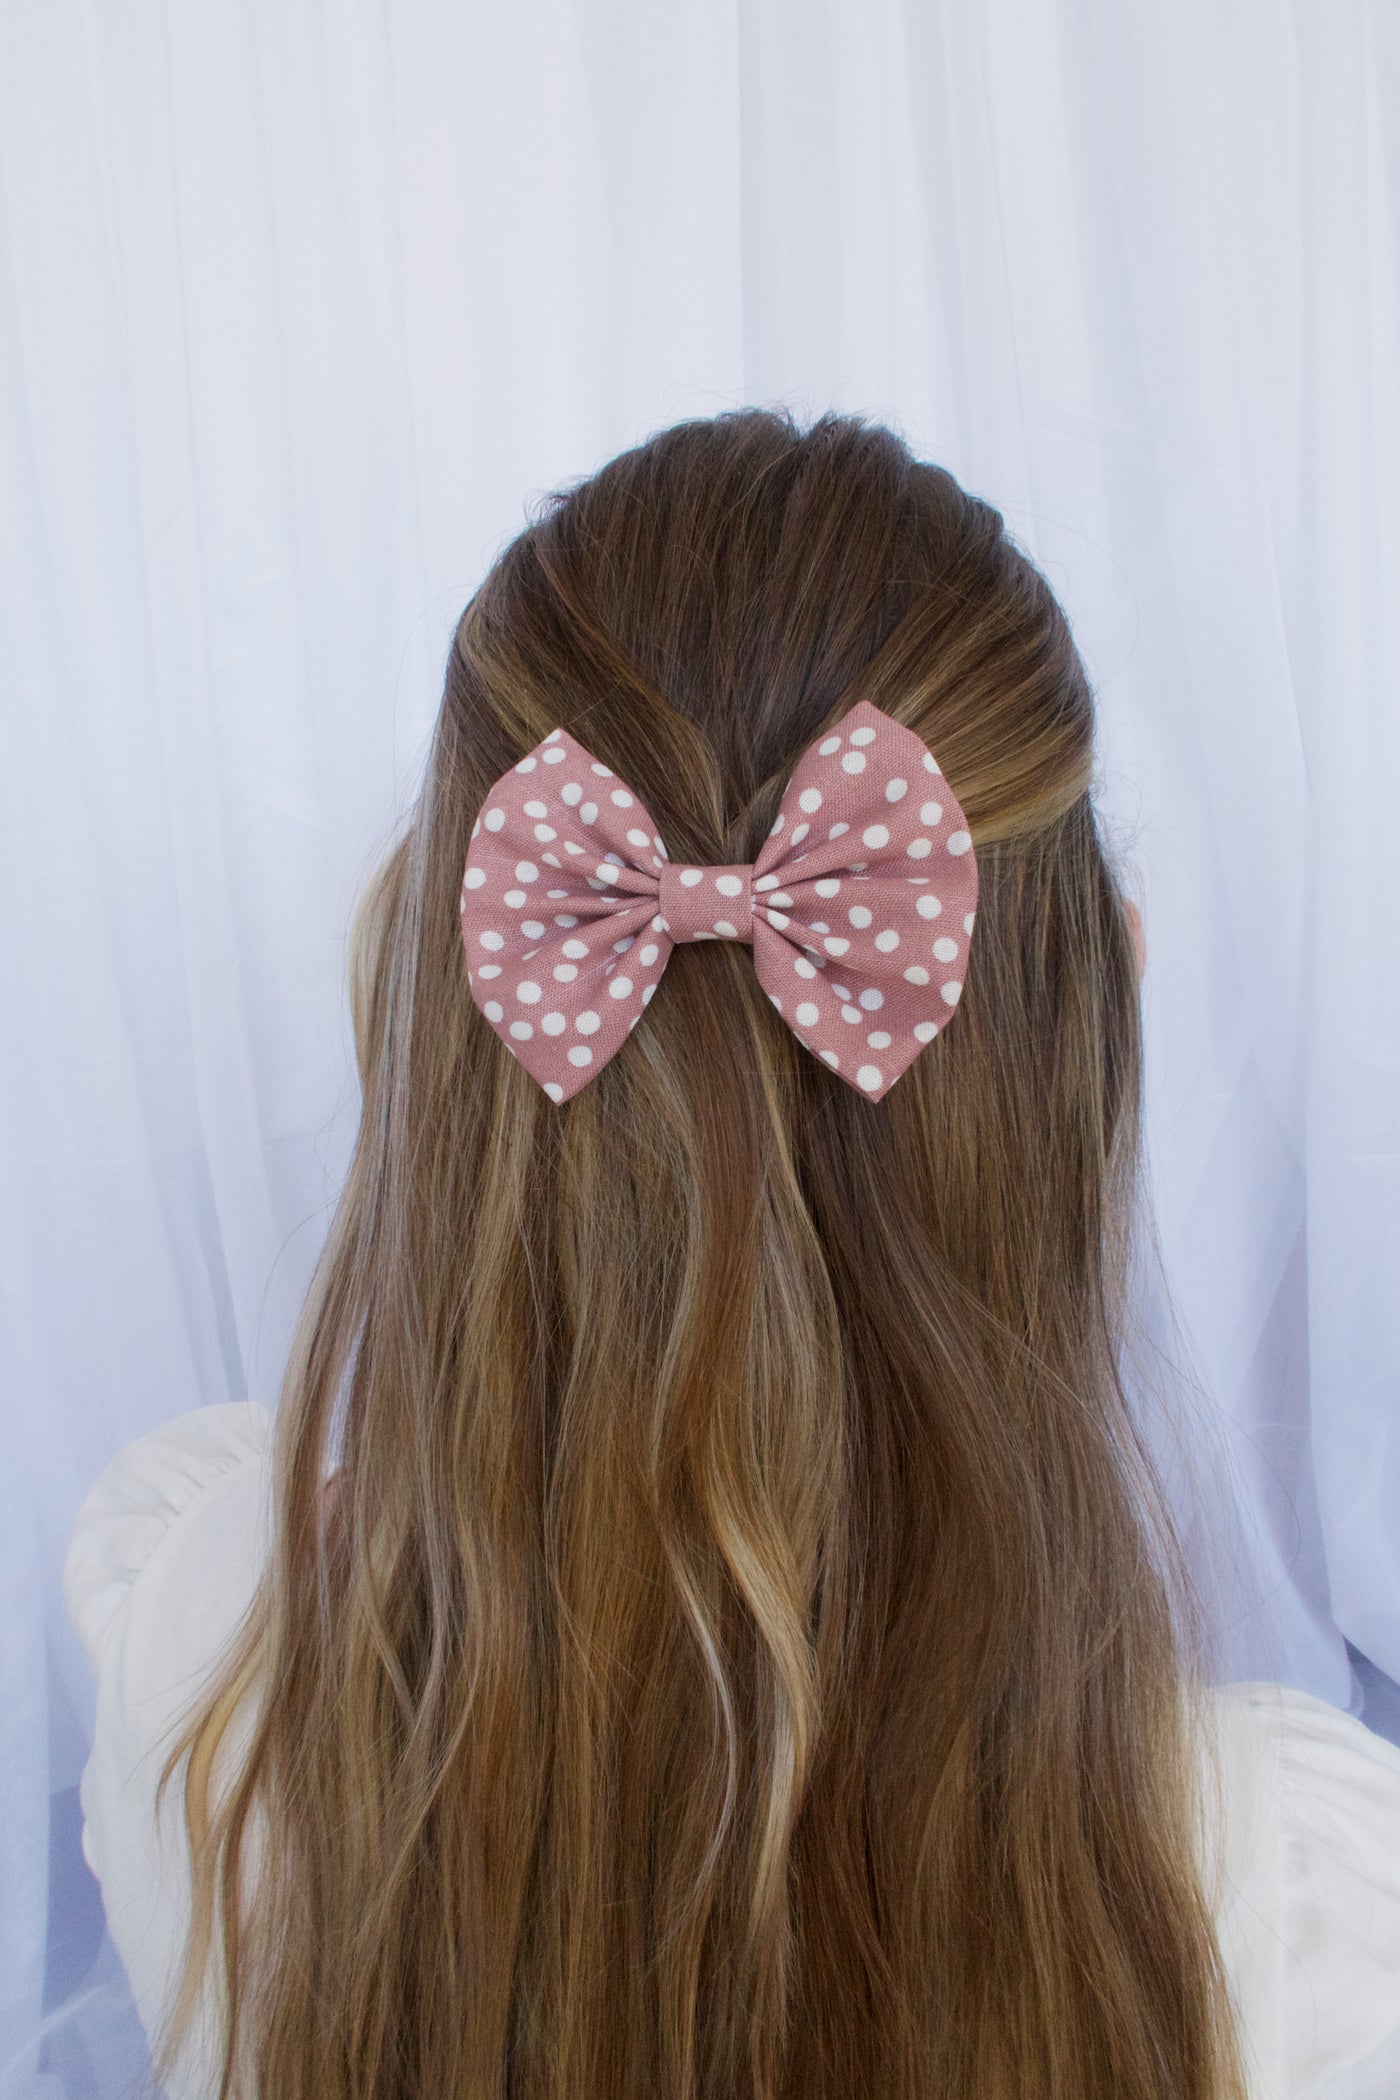 Candy Hearts Bow